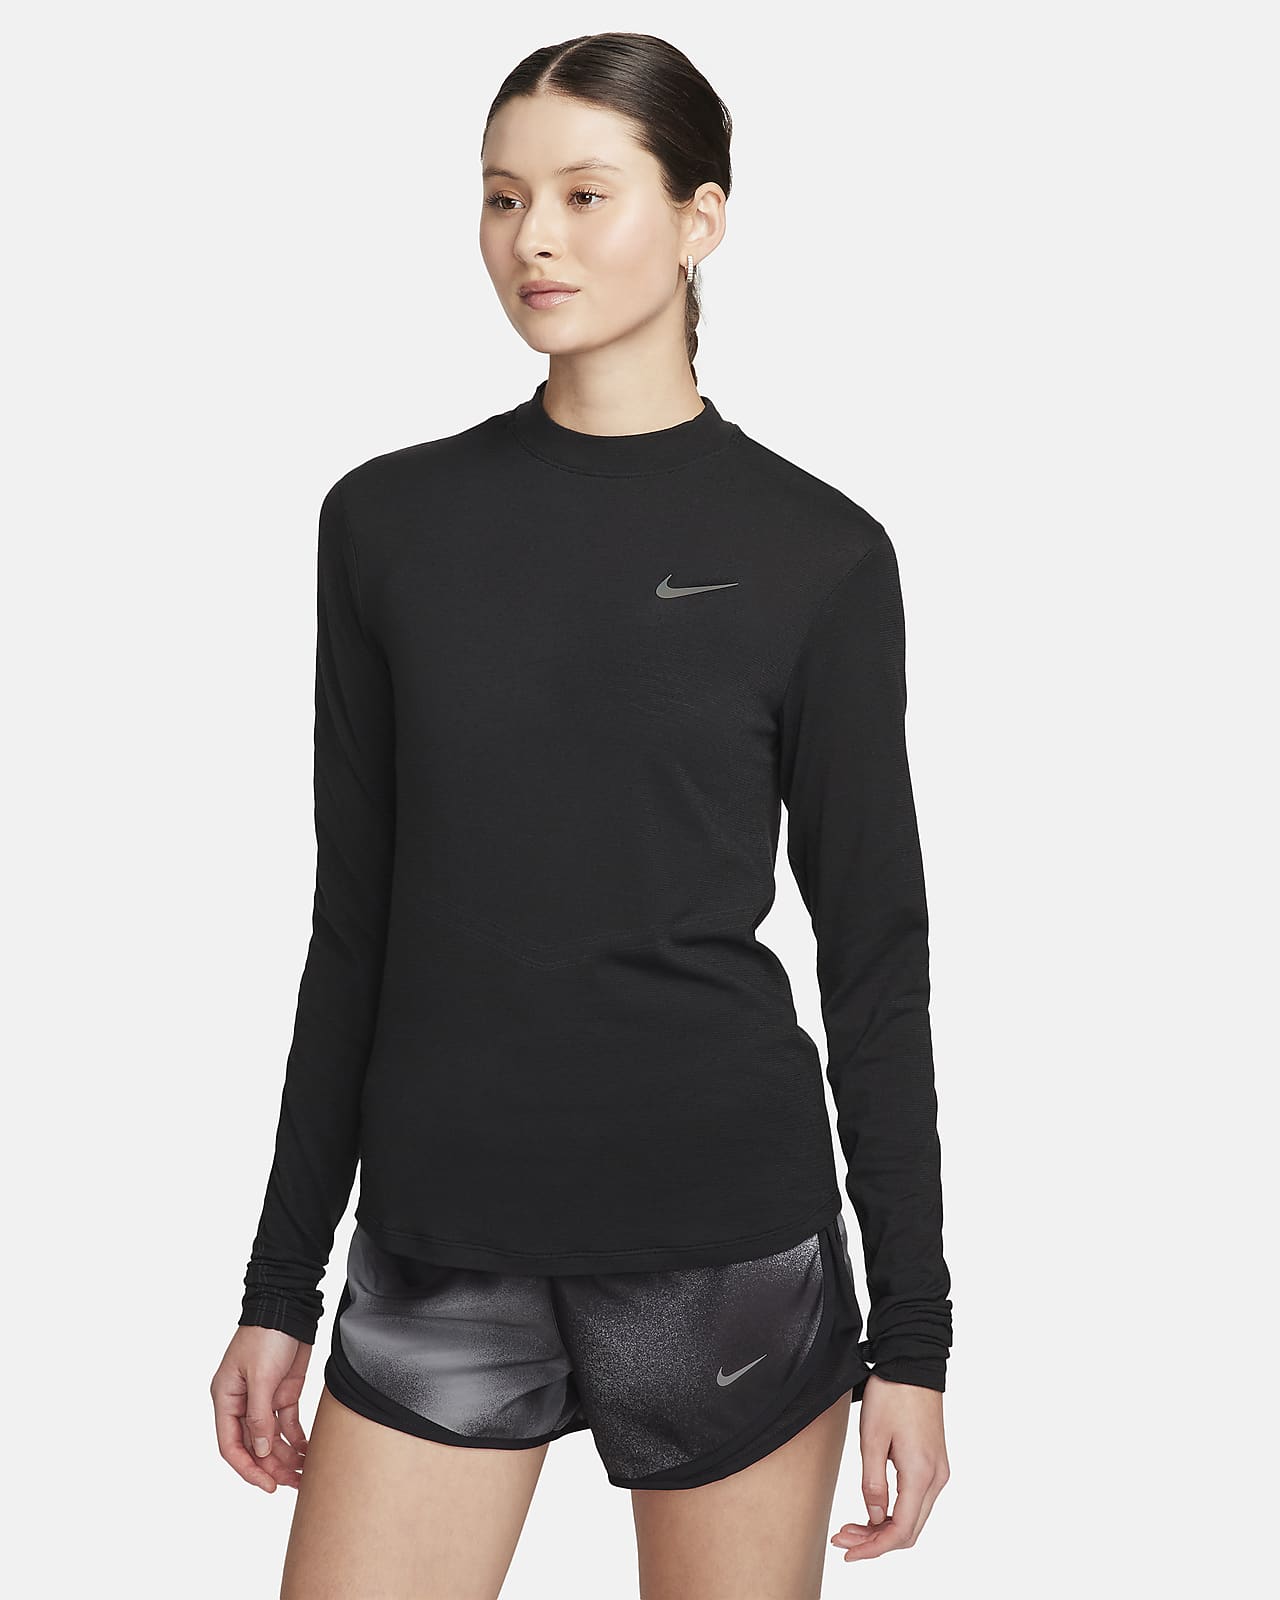 https://static.nike.com/a/images/t_PDP_1280_v1/f_auto,q_auto:eco/546dc561-99ed-43db-9a06-d854f2a1abfe/swift-dri-fit-mock-neck-long-sleeve-running-top-qGh16k.png